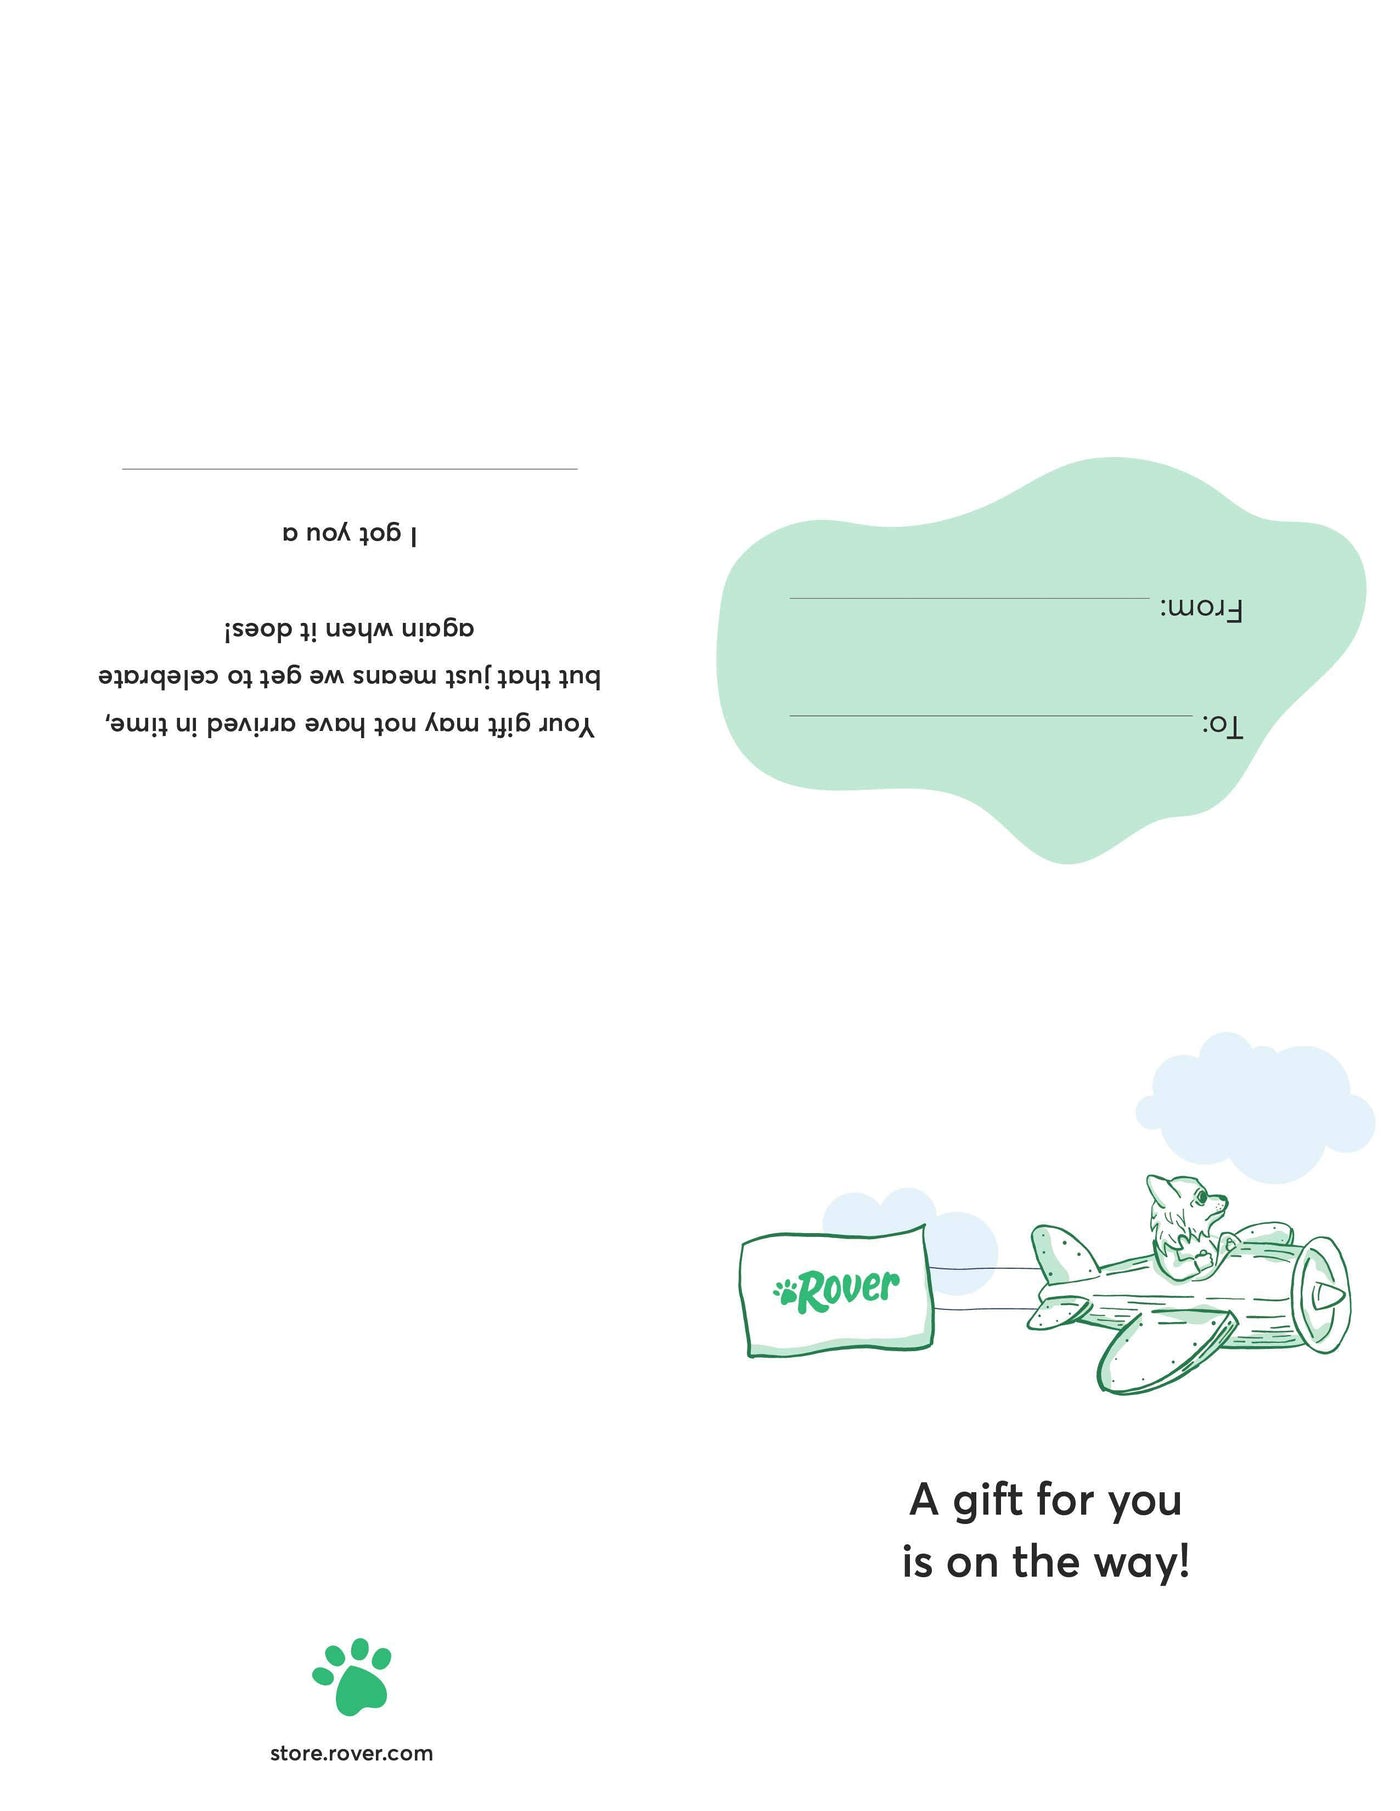 'A Gift Is On the Way!’ Card - Free Download Download Rover Store 